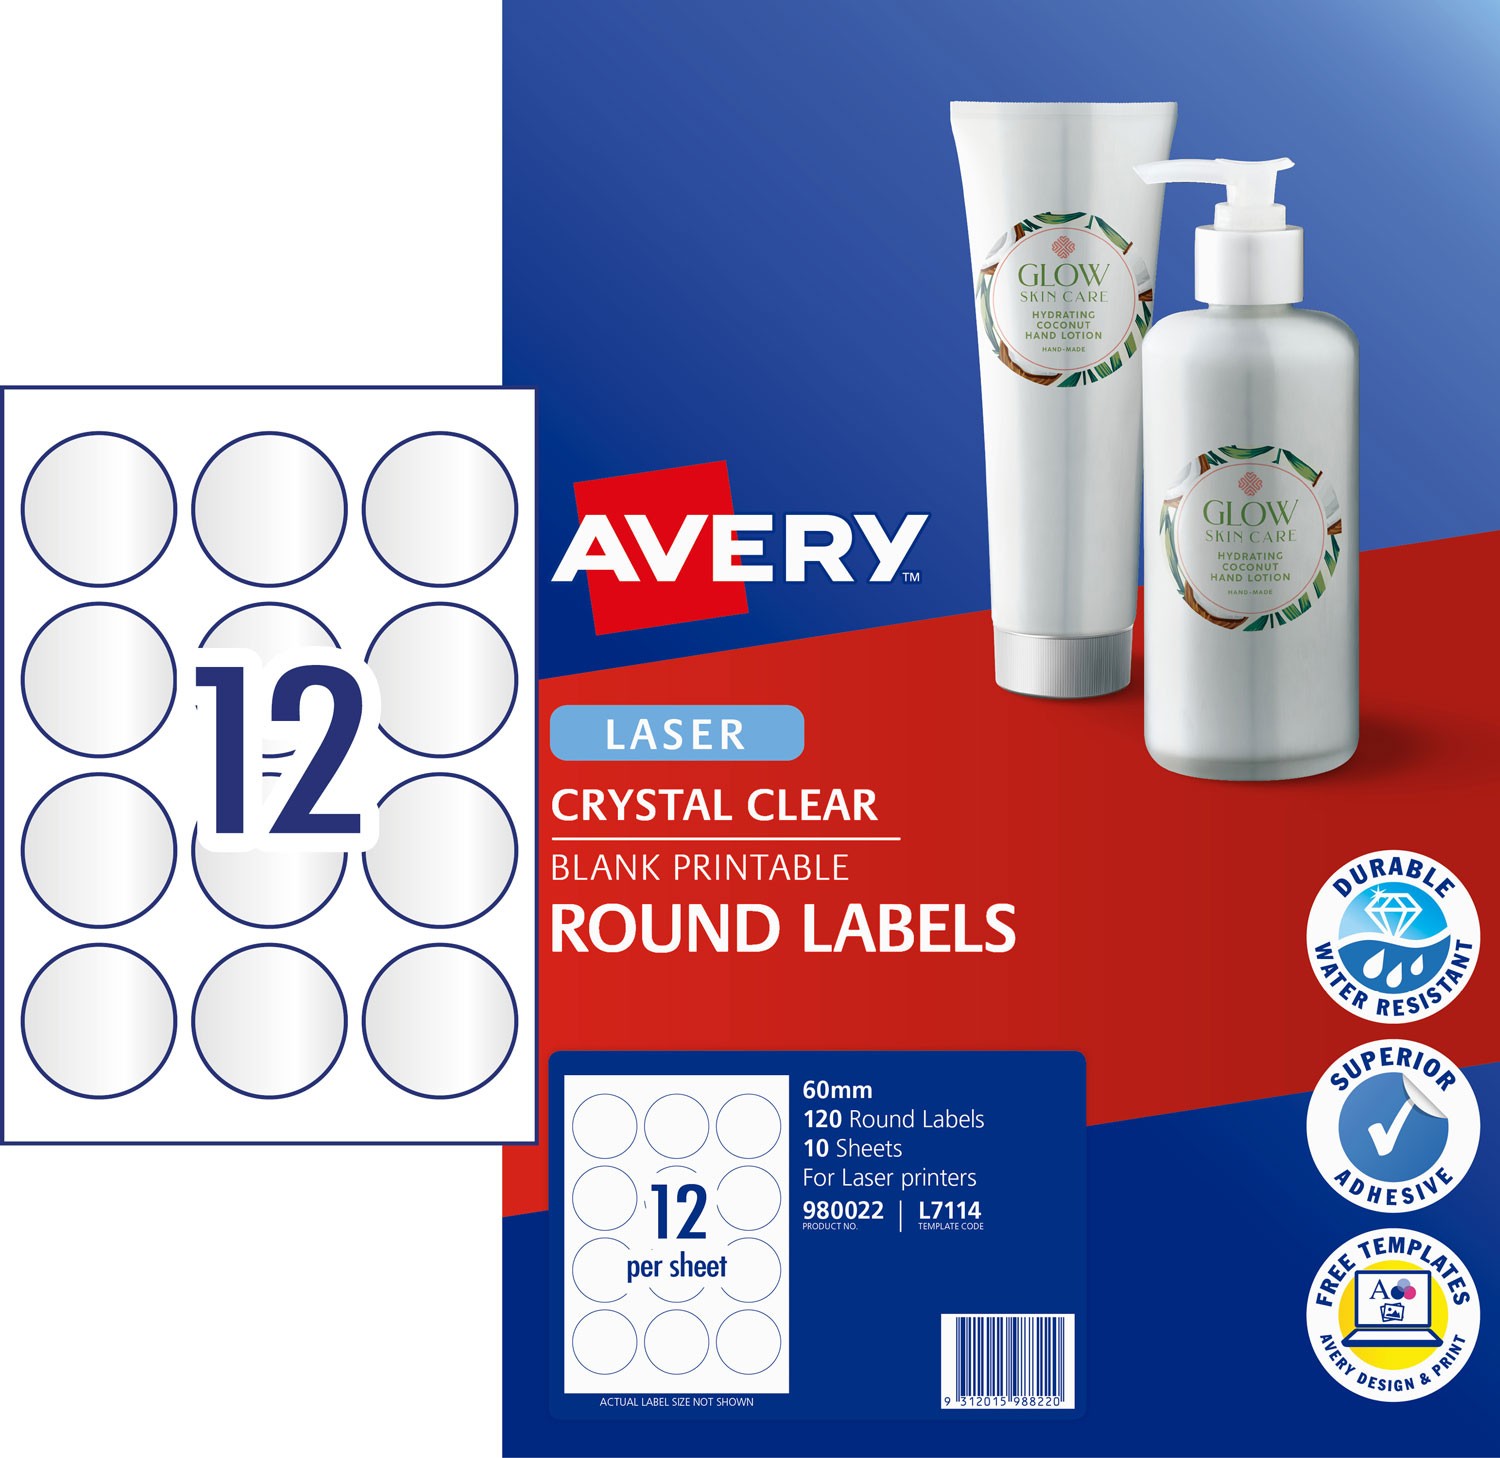 Crystal Clear Round Labels 980022 Avery Australia